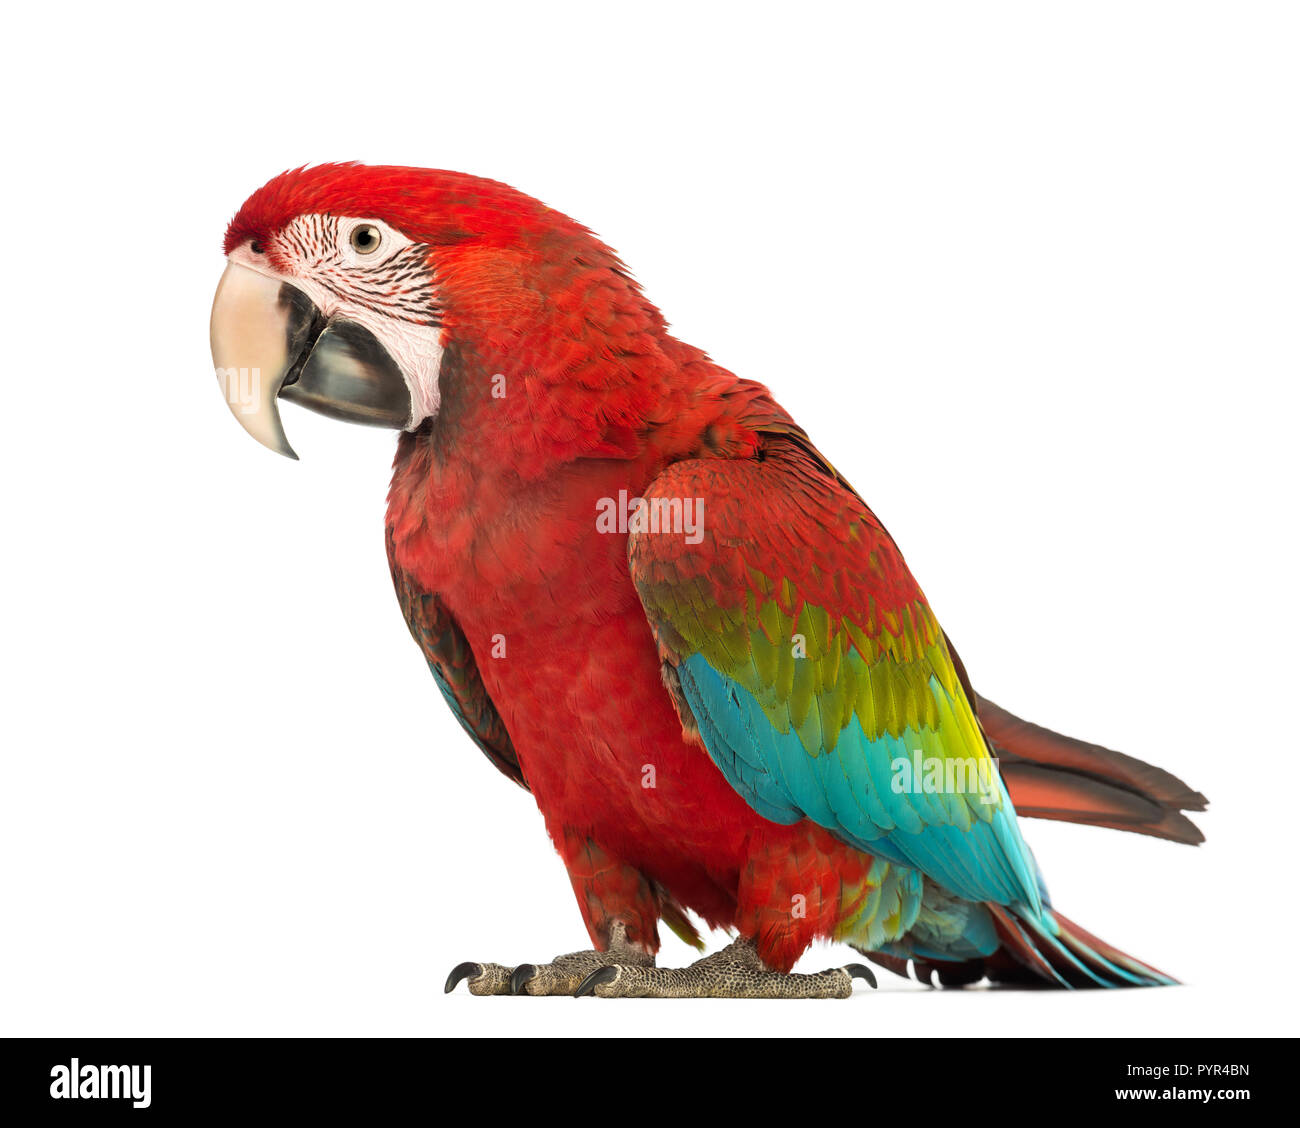 Green-winged Macaw, Ara chloropterus, 1 year old, in front of white background Stock Photo